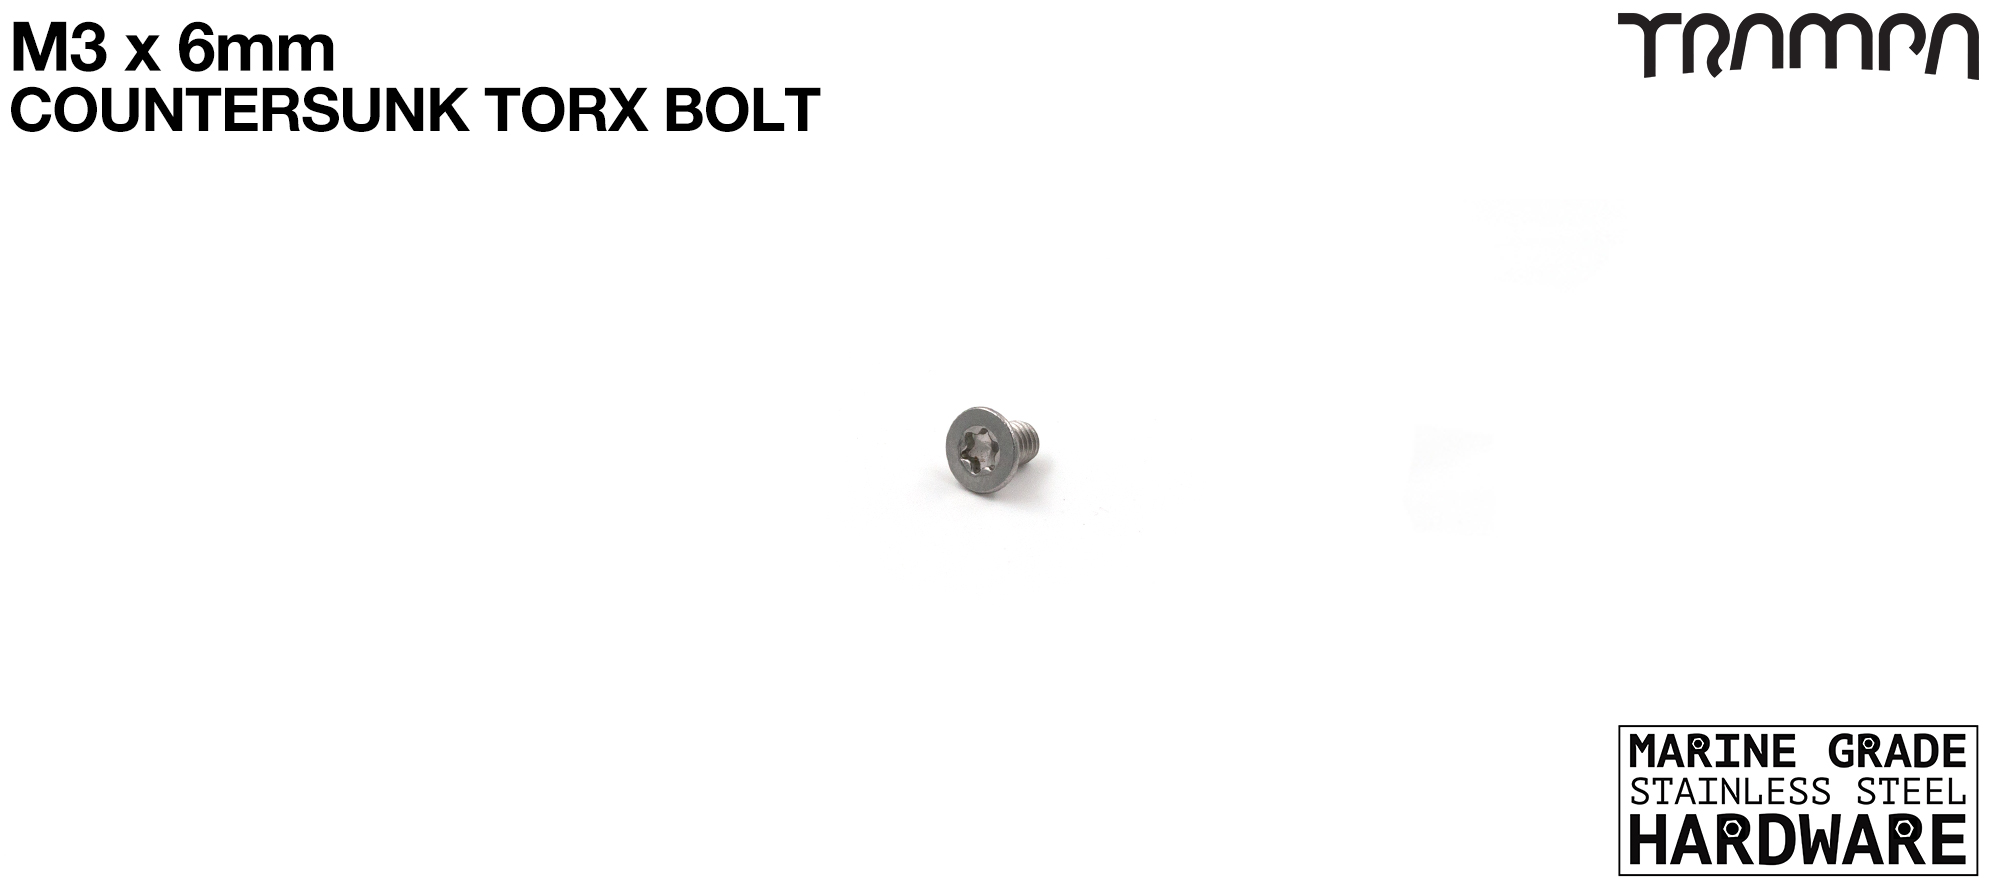 M3 x 6mm TORX Countersunk Bolt - Marine Grade Stainless steel with TORX Fitting (COPY)